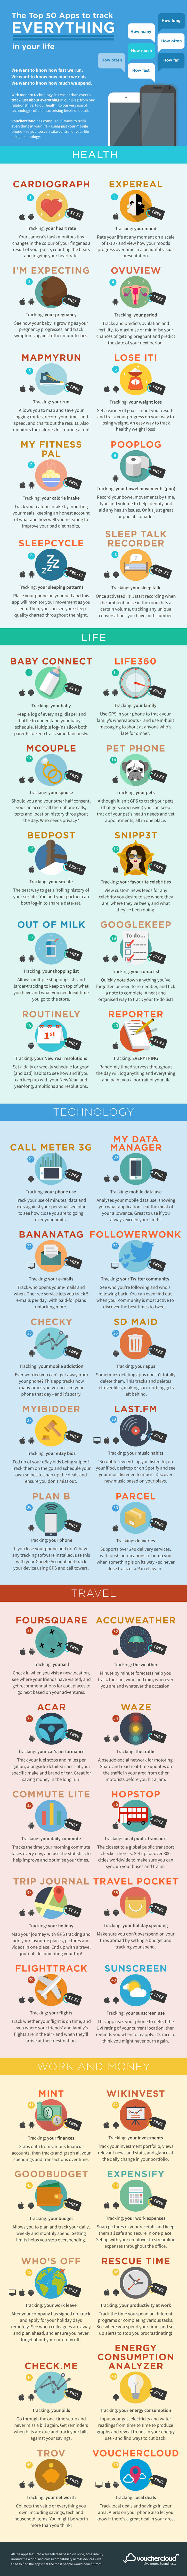 50 Apps to Track Everything in Your Life infographic